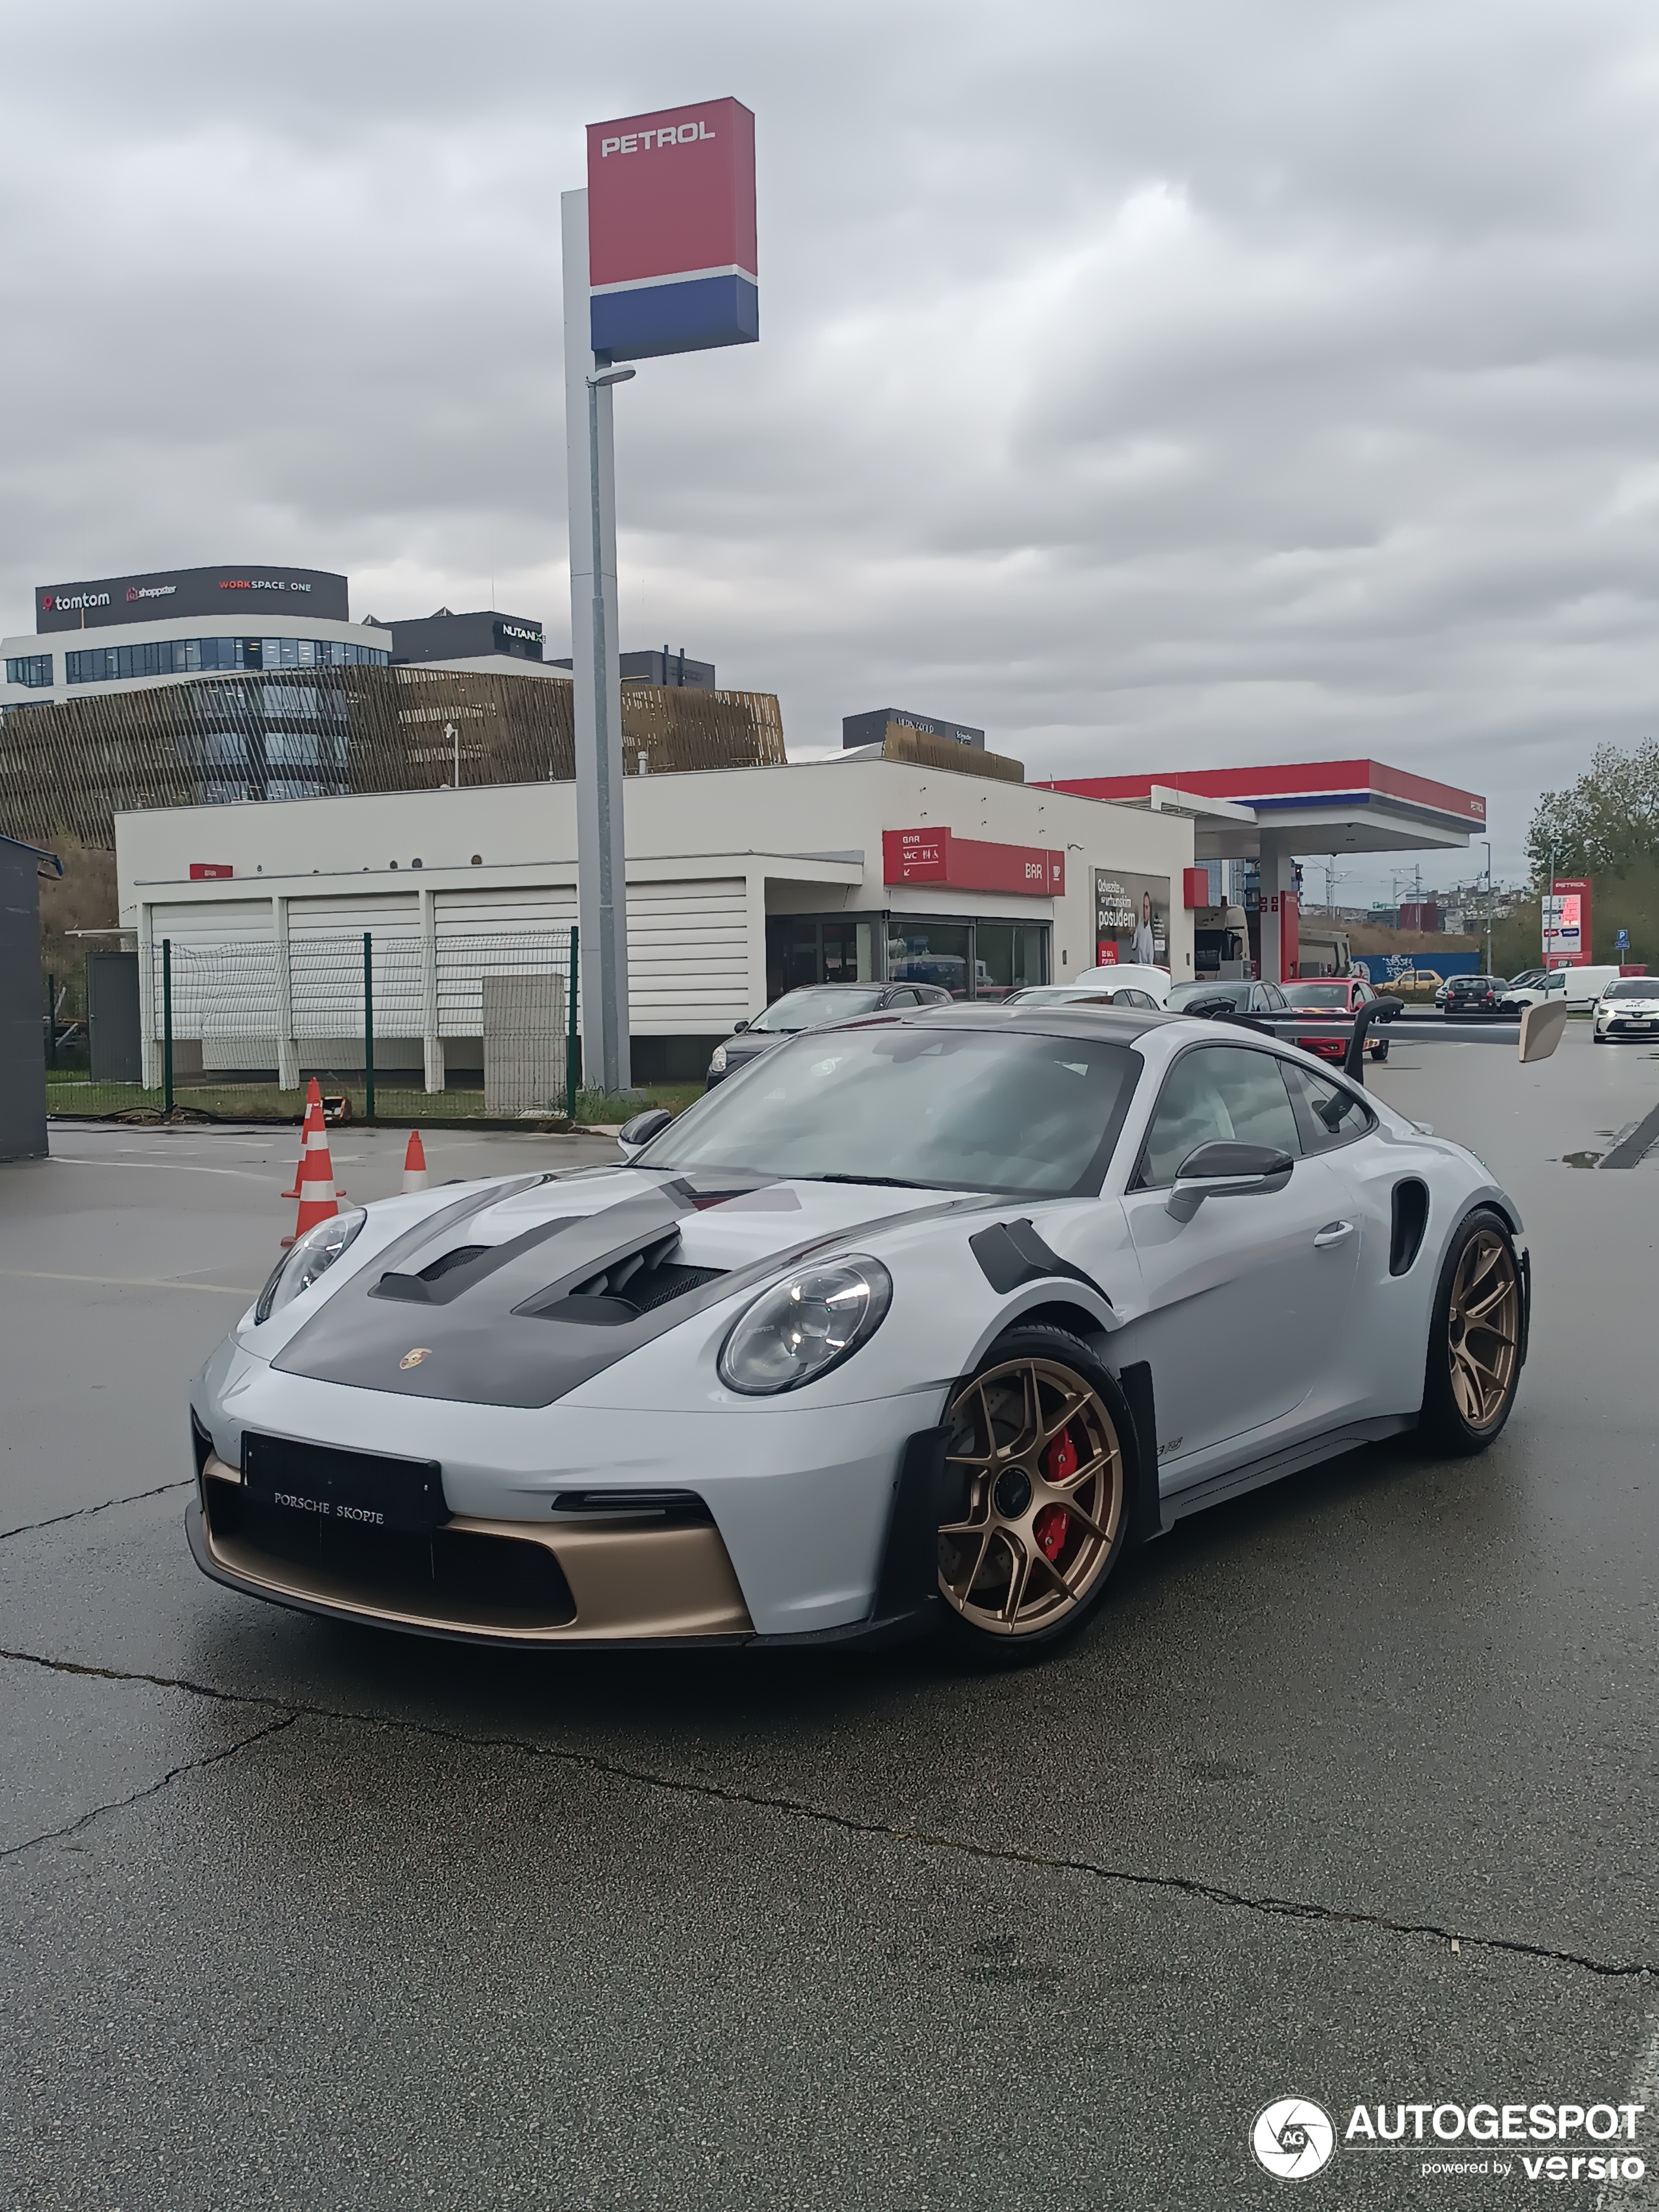 An extremely exceptional GT3 RS